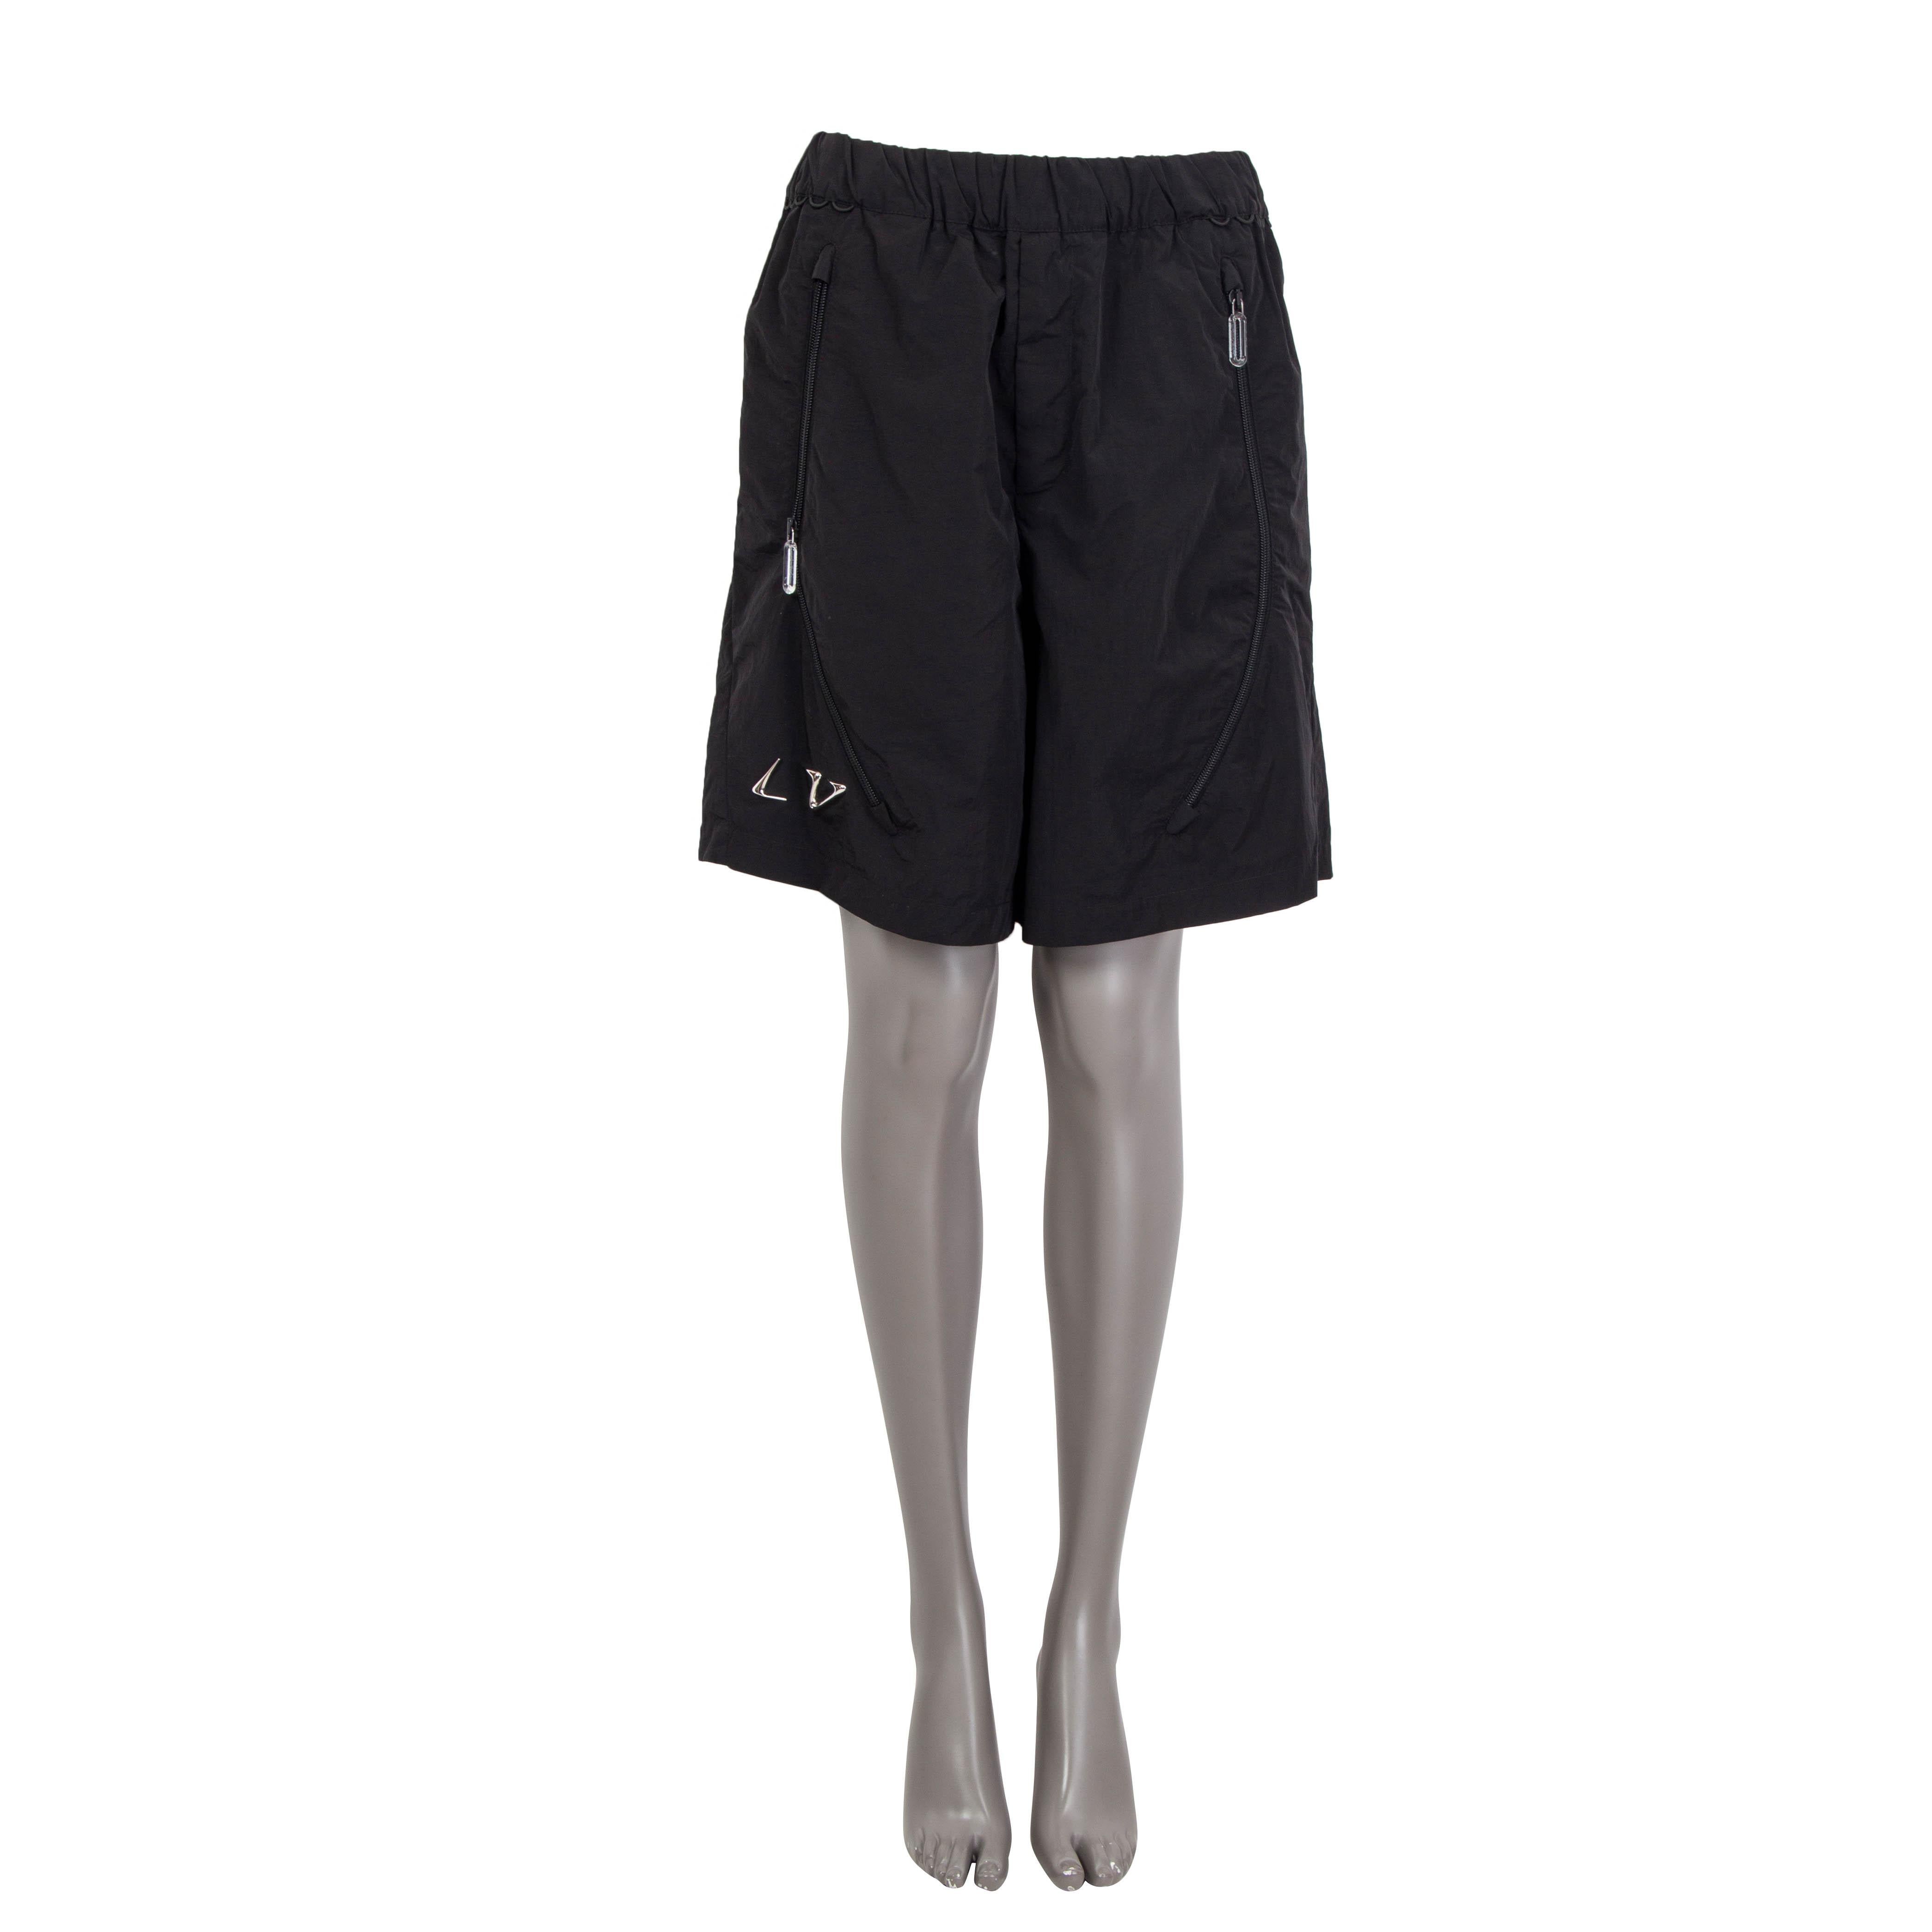 100% authentic Louis Vuitton 2054 II shorts in black polyamide (100%). Feature two zip pockets at the front and an elastic waistband. Have been worn once and are in virtually new condition.

Measurements
Tag Size	40
Size	S
Waist	72cm (28.1in) to